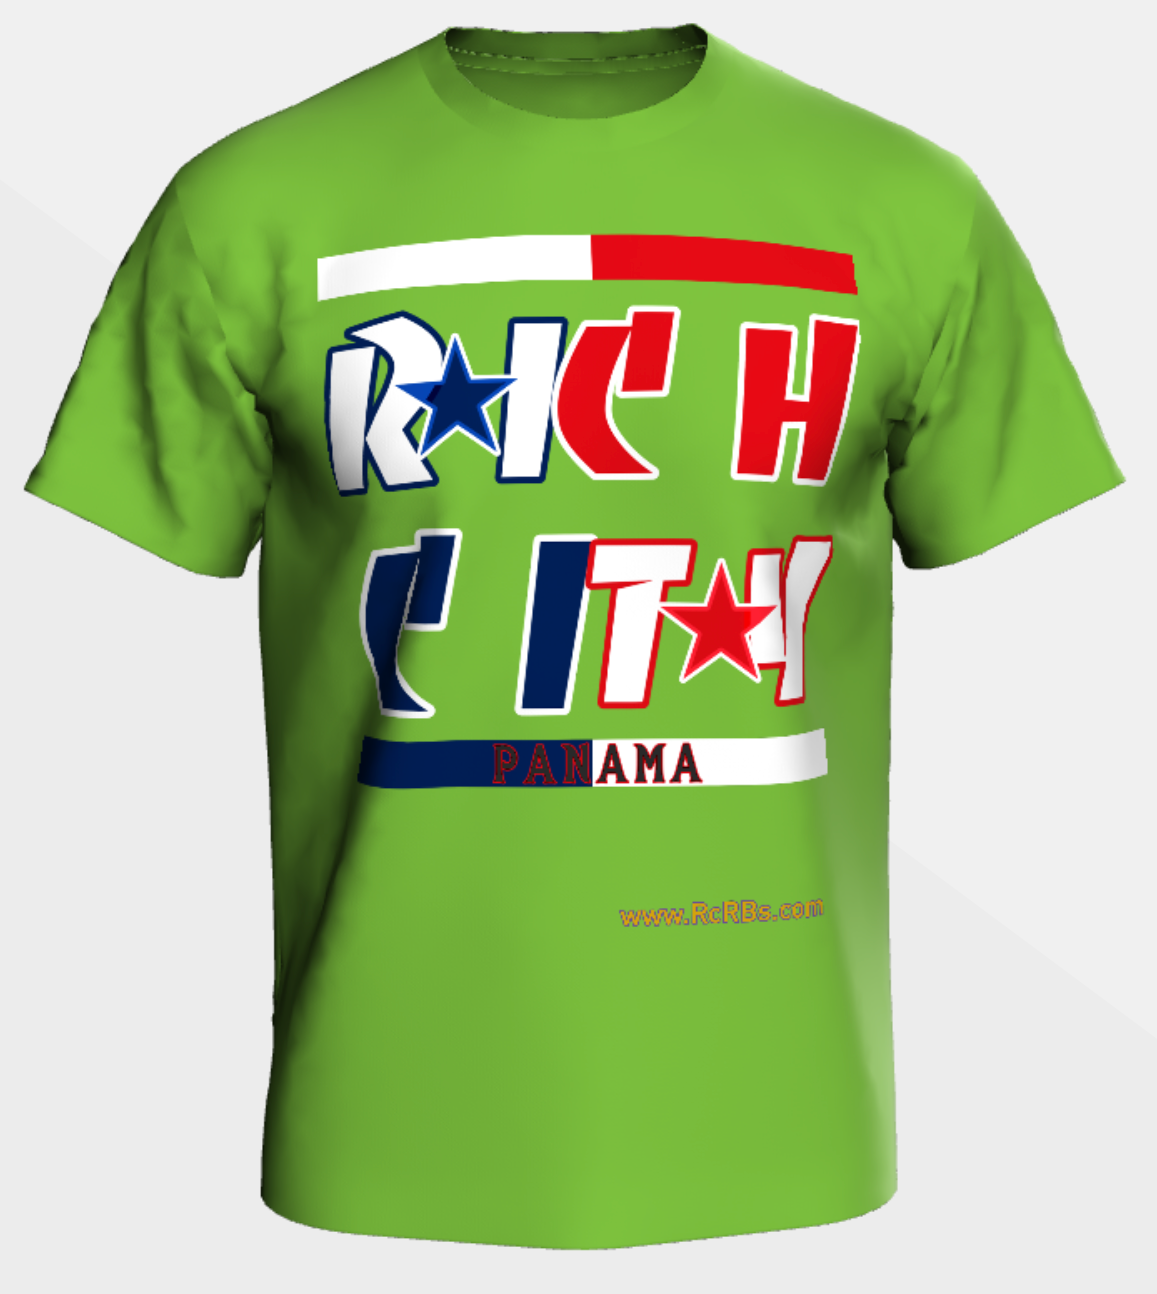 New 2023 RichCity Rides Bike/Skate Cooperative -"Panama"- Sustainable Clothing Collection